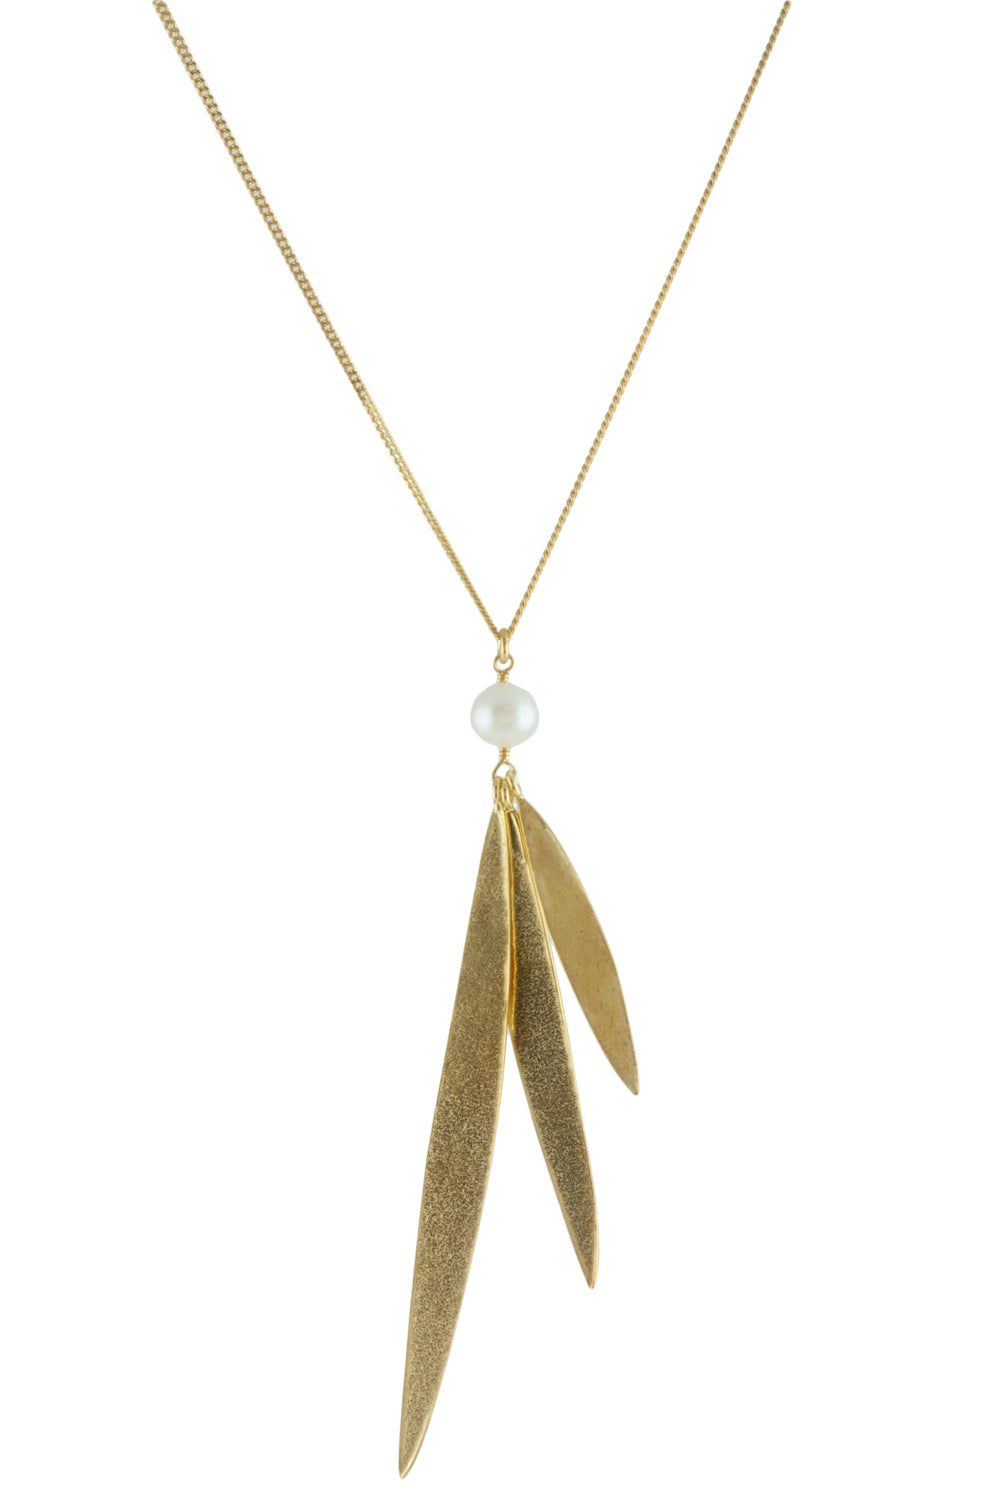 Lily Long Leaf Necklace with a Fresh Water Pearl